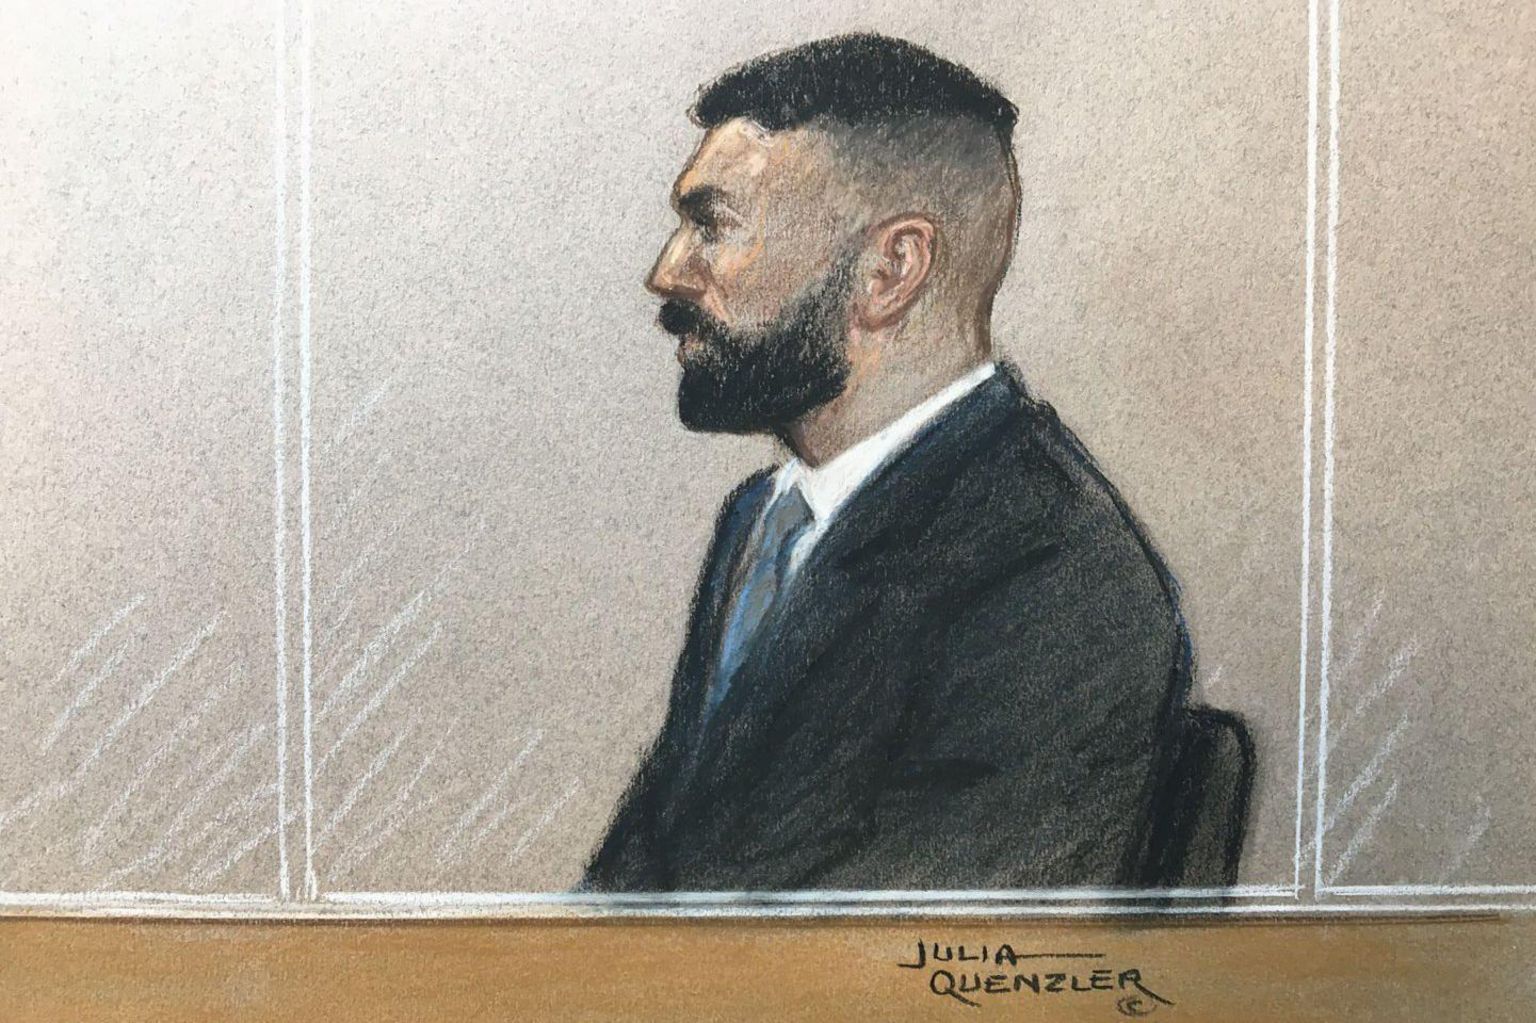 Drawing of PC Imran Mahmood in the dock at Southwark Crown Court on 2 May.